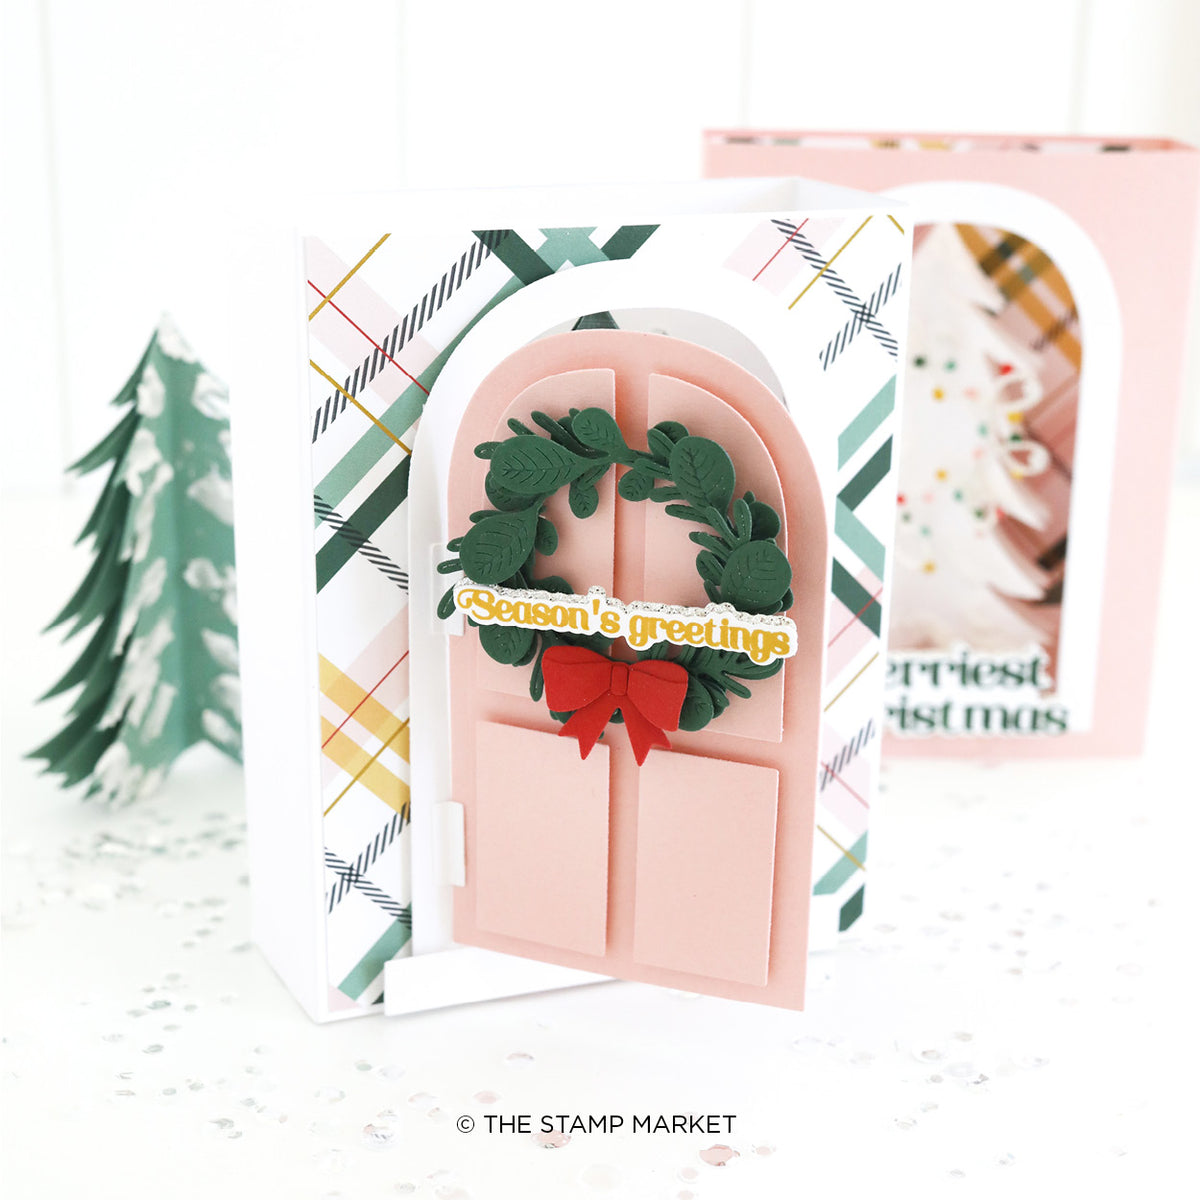 FEELS LIKE CHRISTMAS STAMP – The Stamp Market